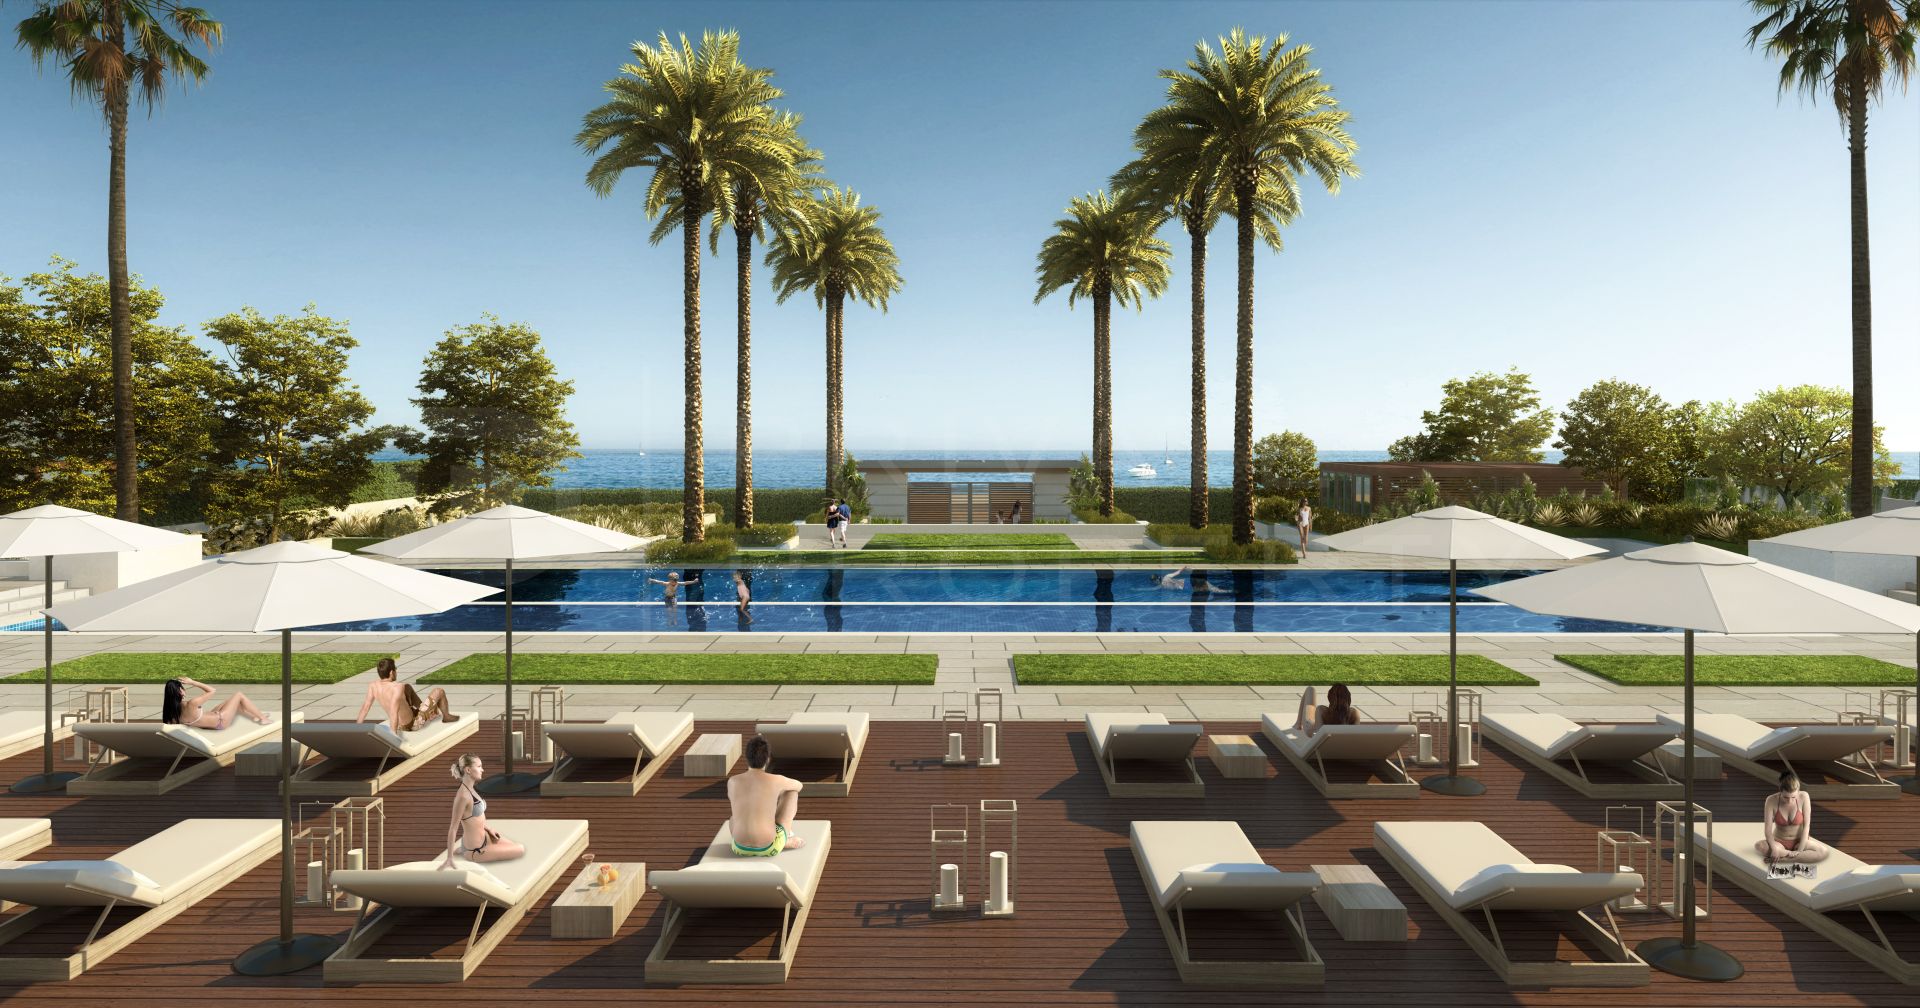 Velaya, beachfront apartments, penthouses and villas in the New Golden Mile